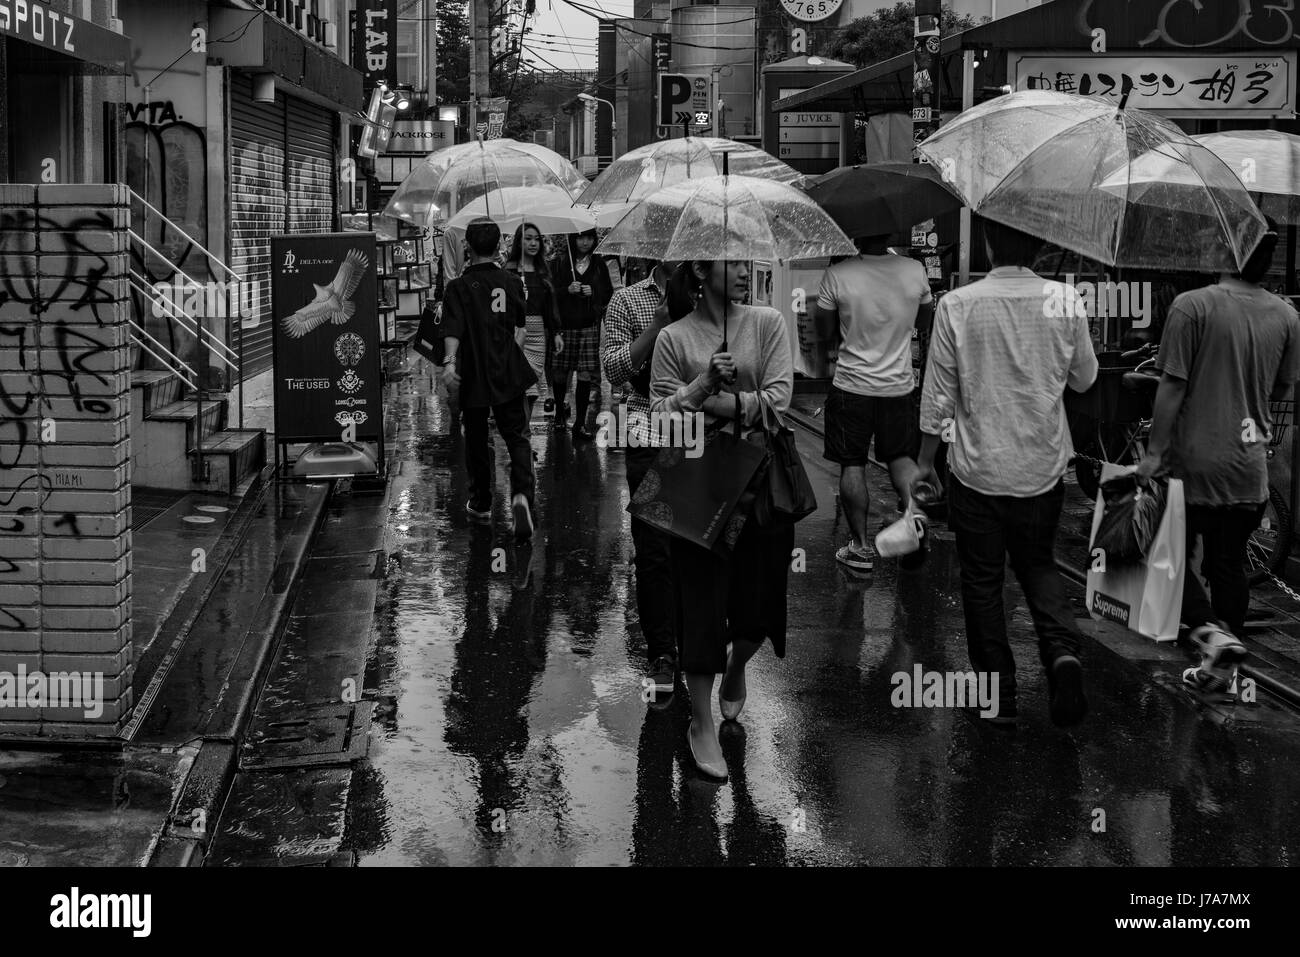 Black and white photo of busy commercial area with people waking up and down the wet street. Stock Photo